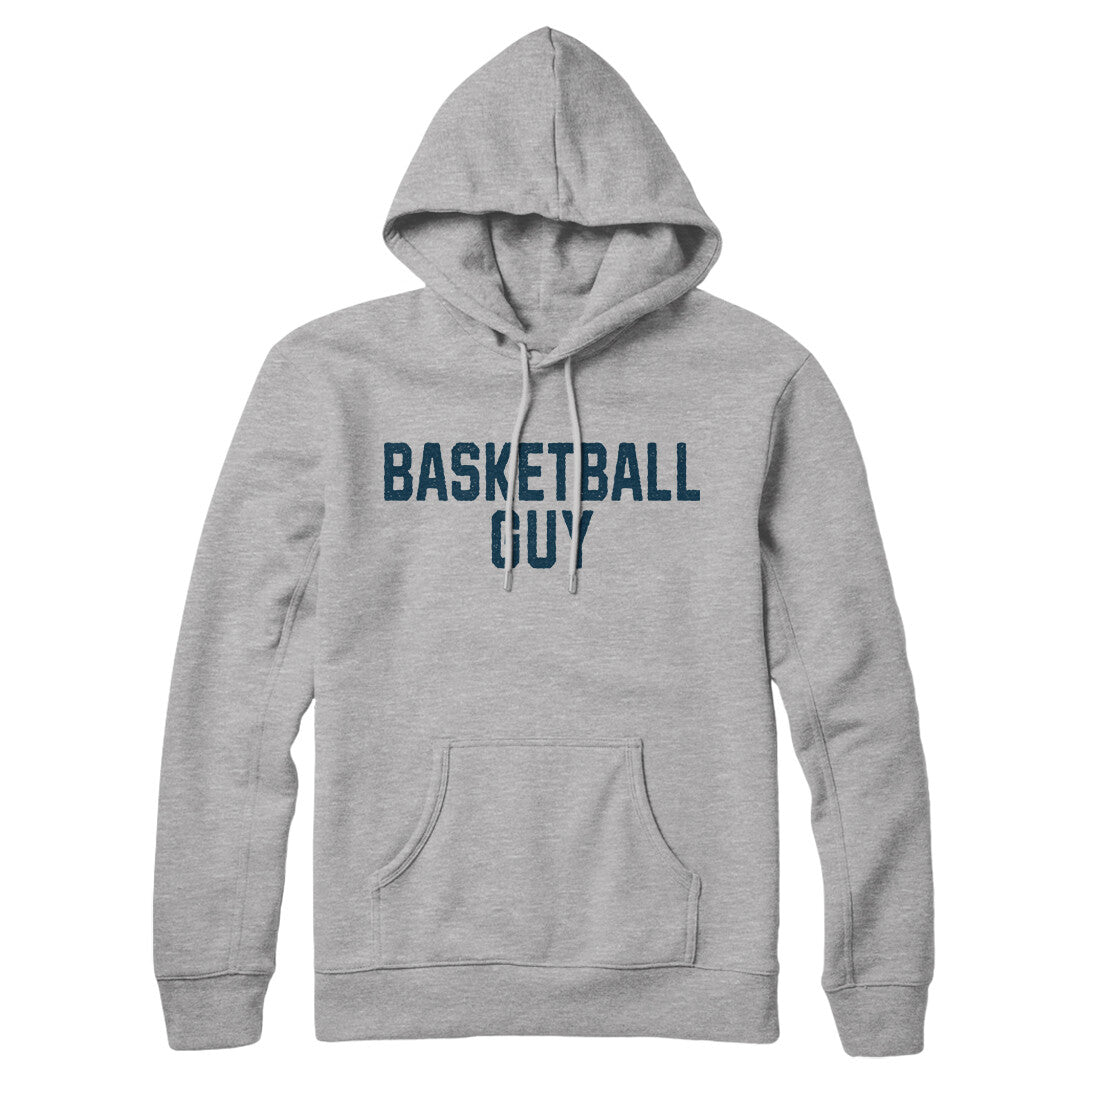 Basketball Guy in Heather Grey Color